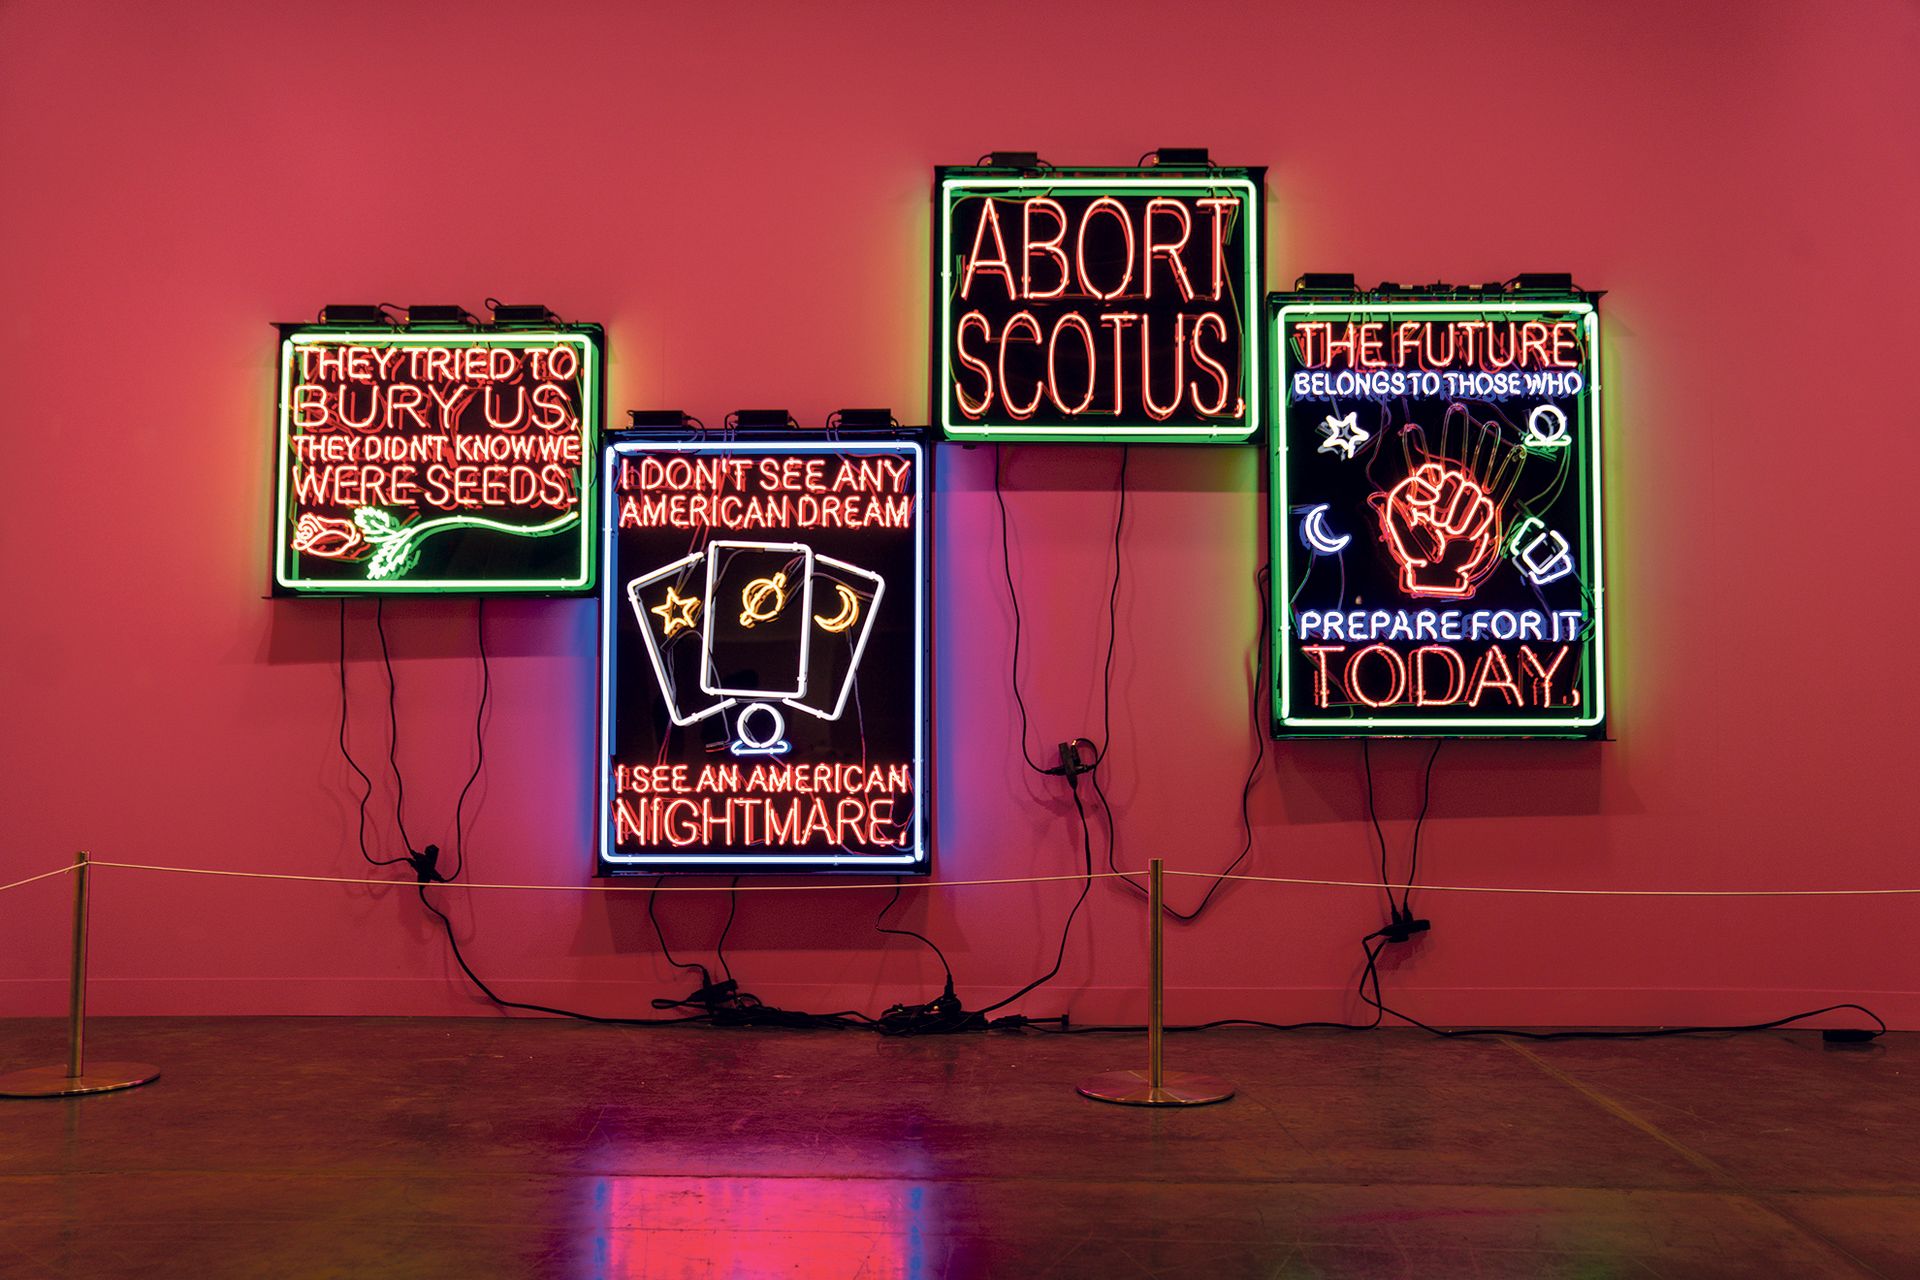 Patrick Martinez’s superficially playful neon works have dark slogans that reflect America’s social and political turmoil Eric Thayer